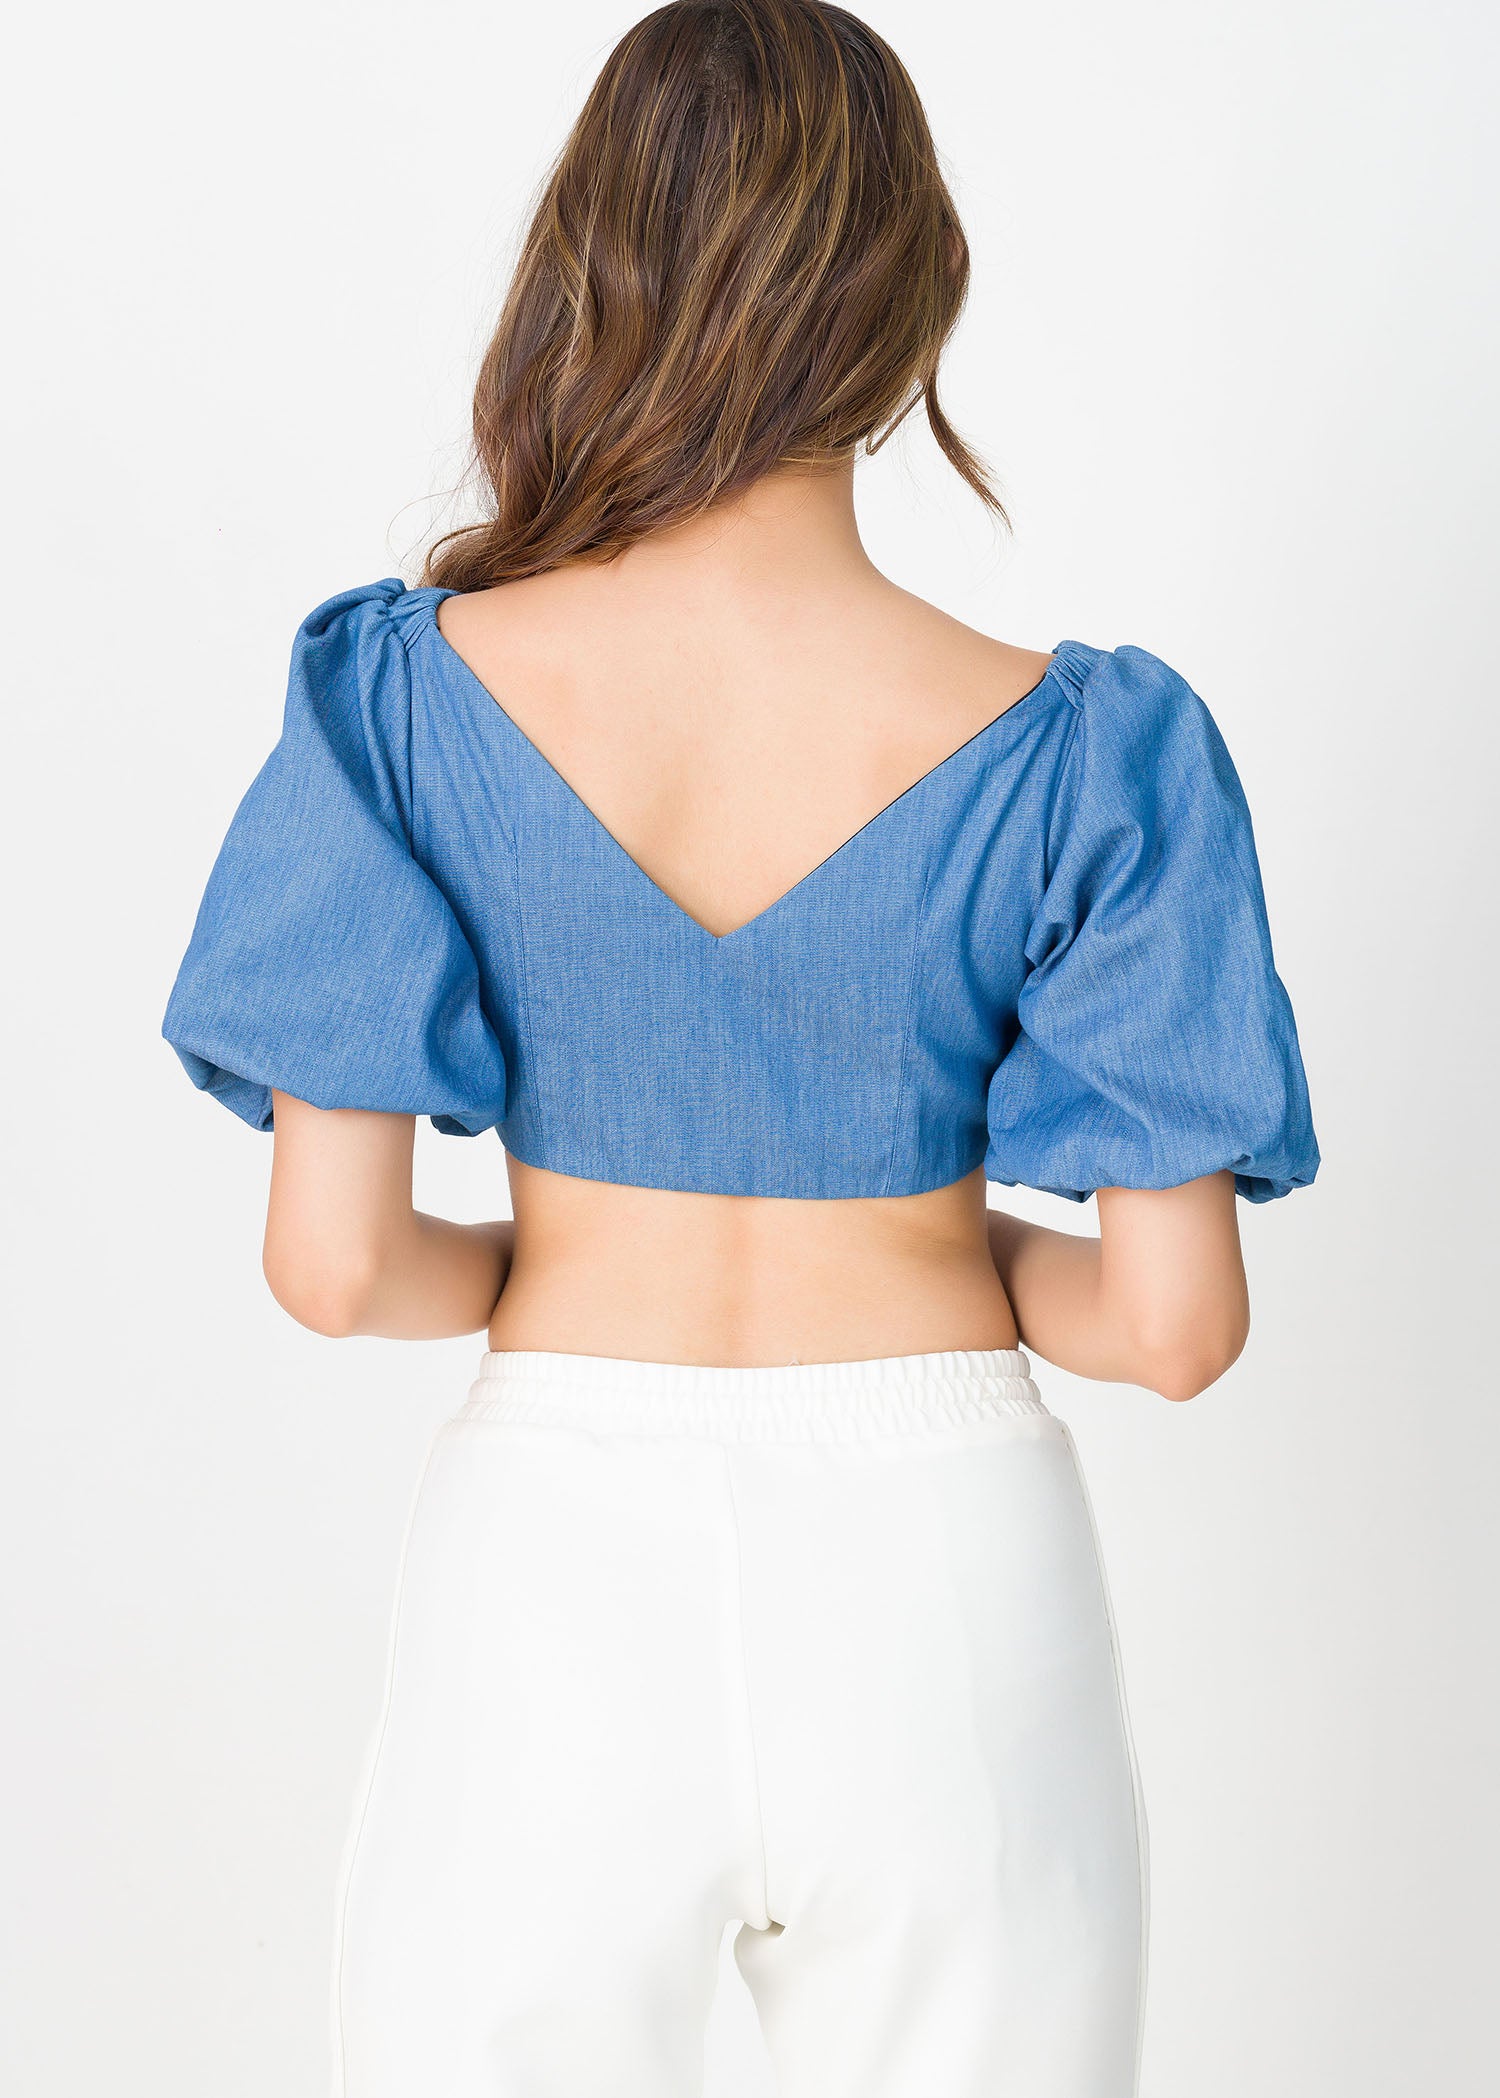 Baloon sleeves cropped top